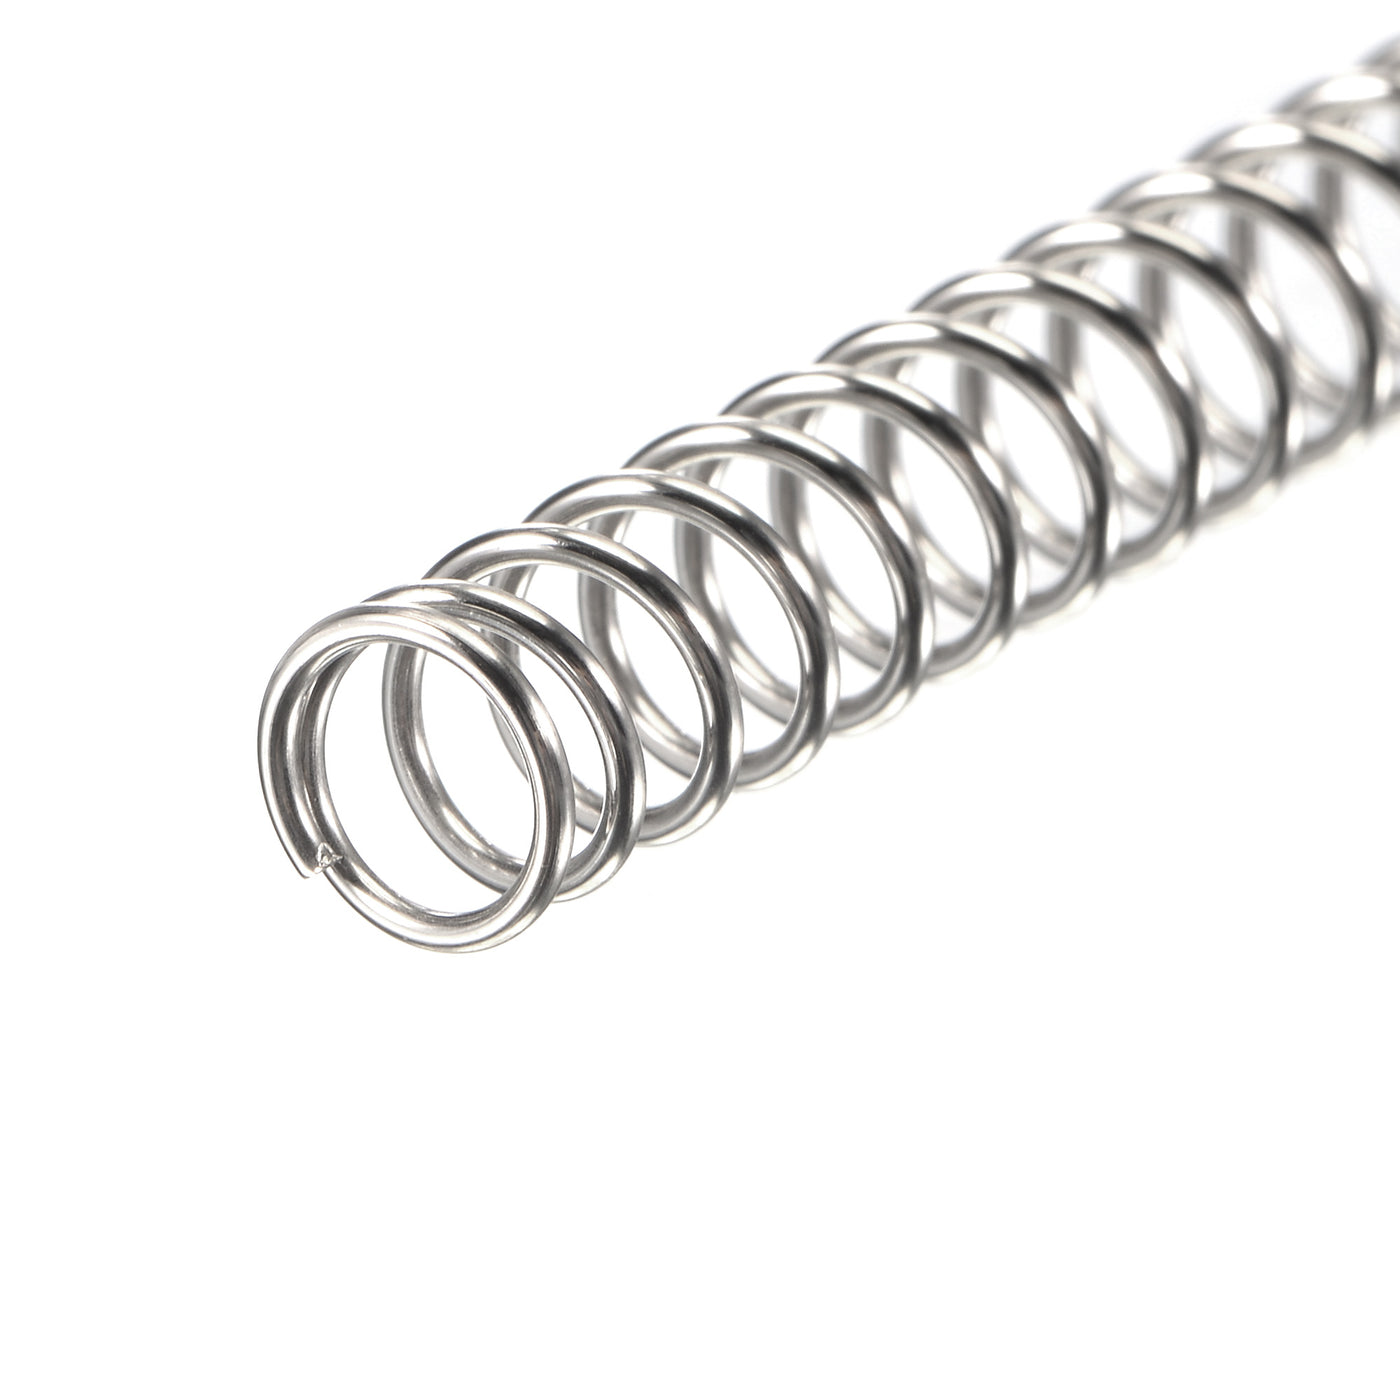 uxcell Uxcell 7mmx0.8mmx50mm 304 Stainless Steel Compression Spring 17.2N Load Capacity 10pcs